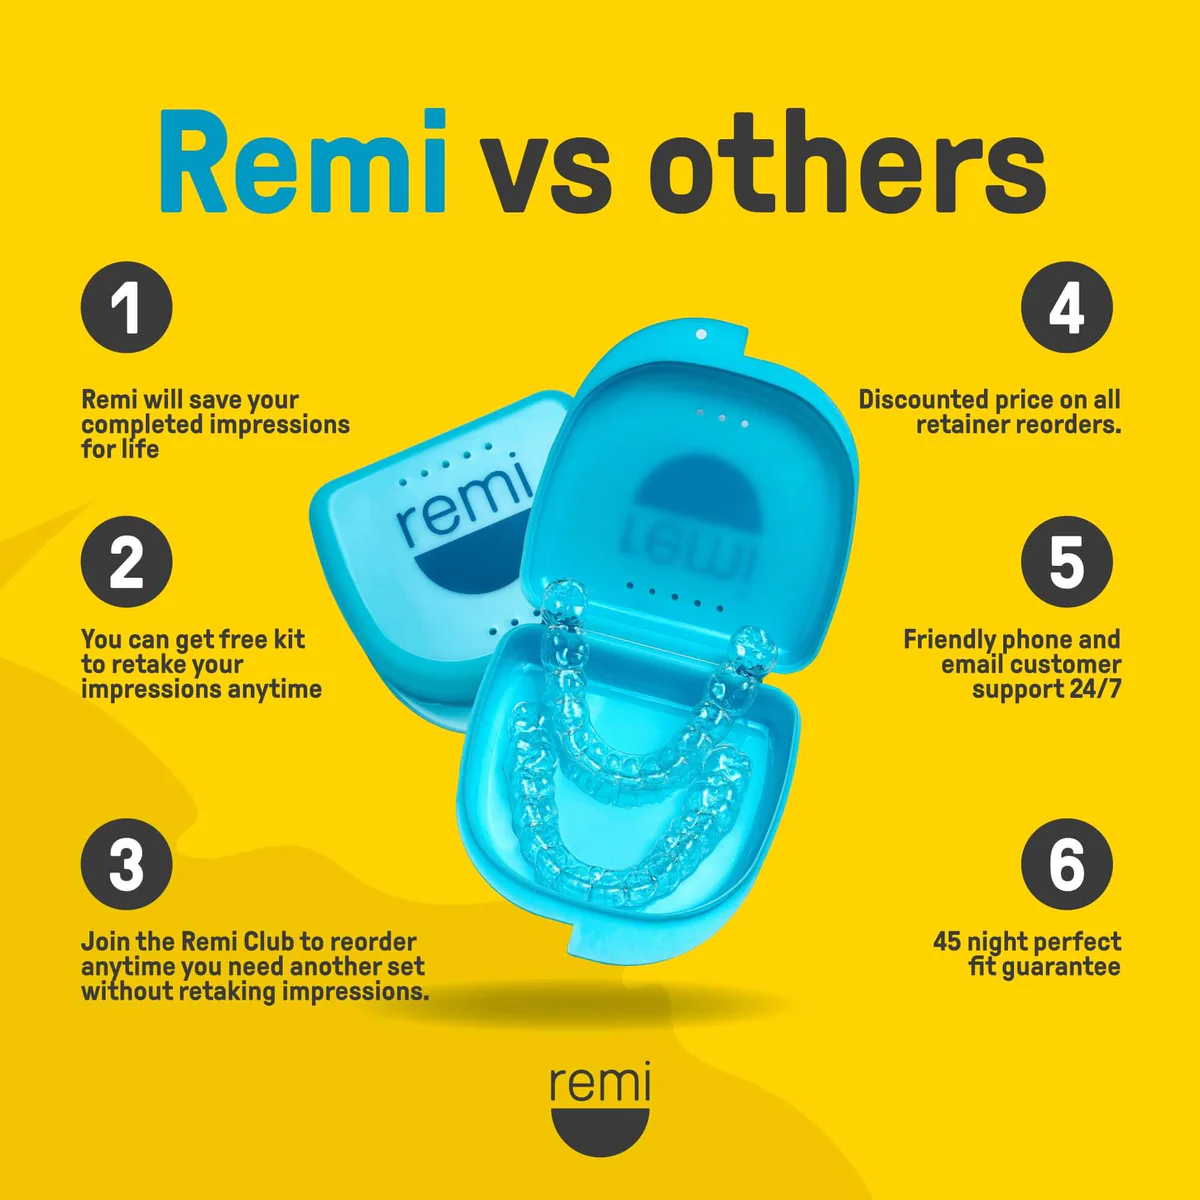 Remi comparison with other retainer brands